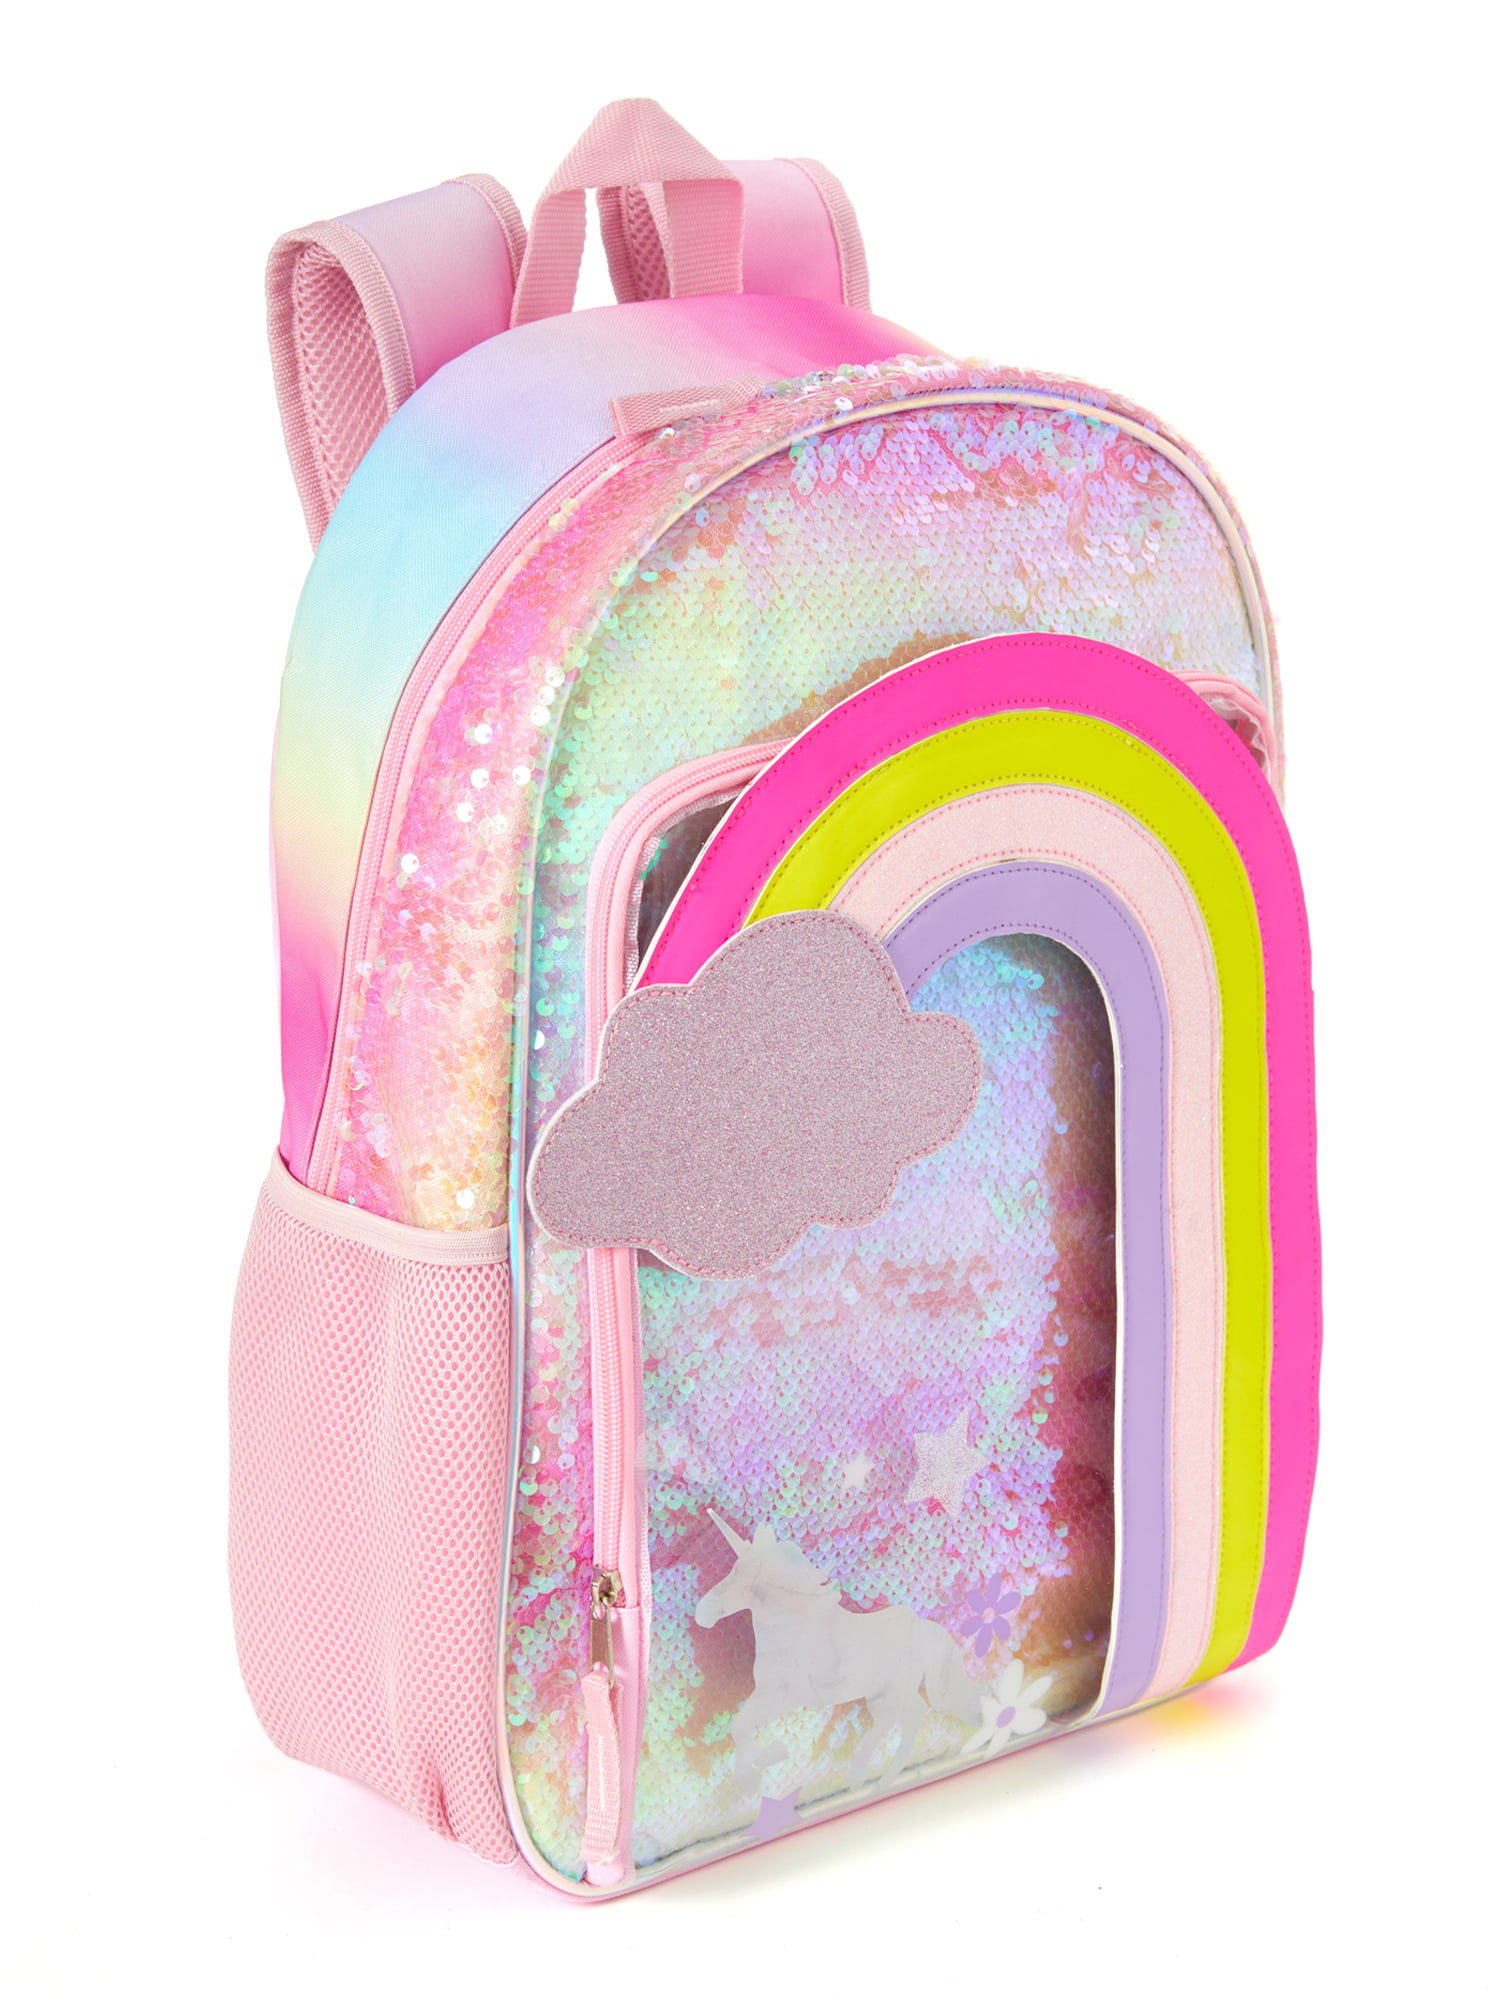 Dropship Schoolyard Vibes Unicorn Girls 17 Sequin Stationary Kids Backpack  Set, Blue to Sell Online at a Lower Price